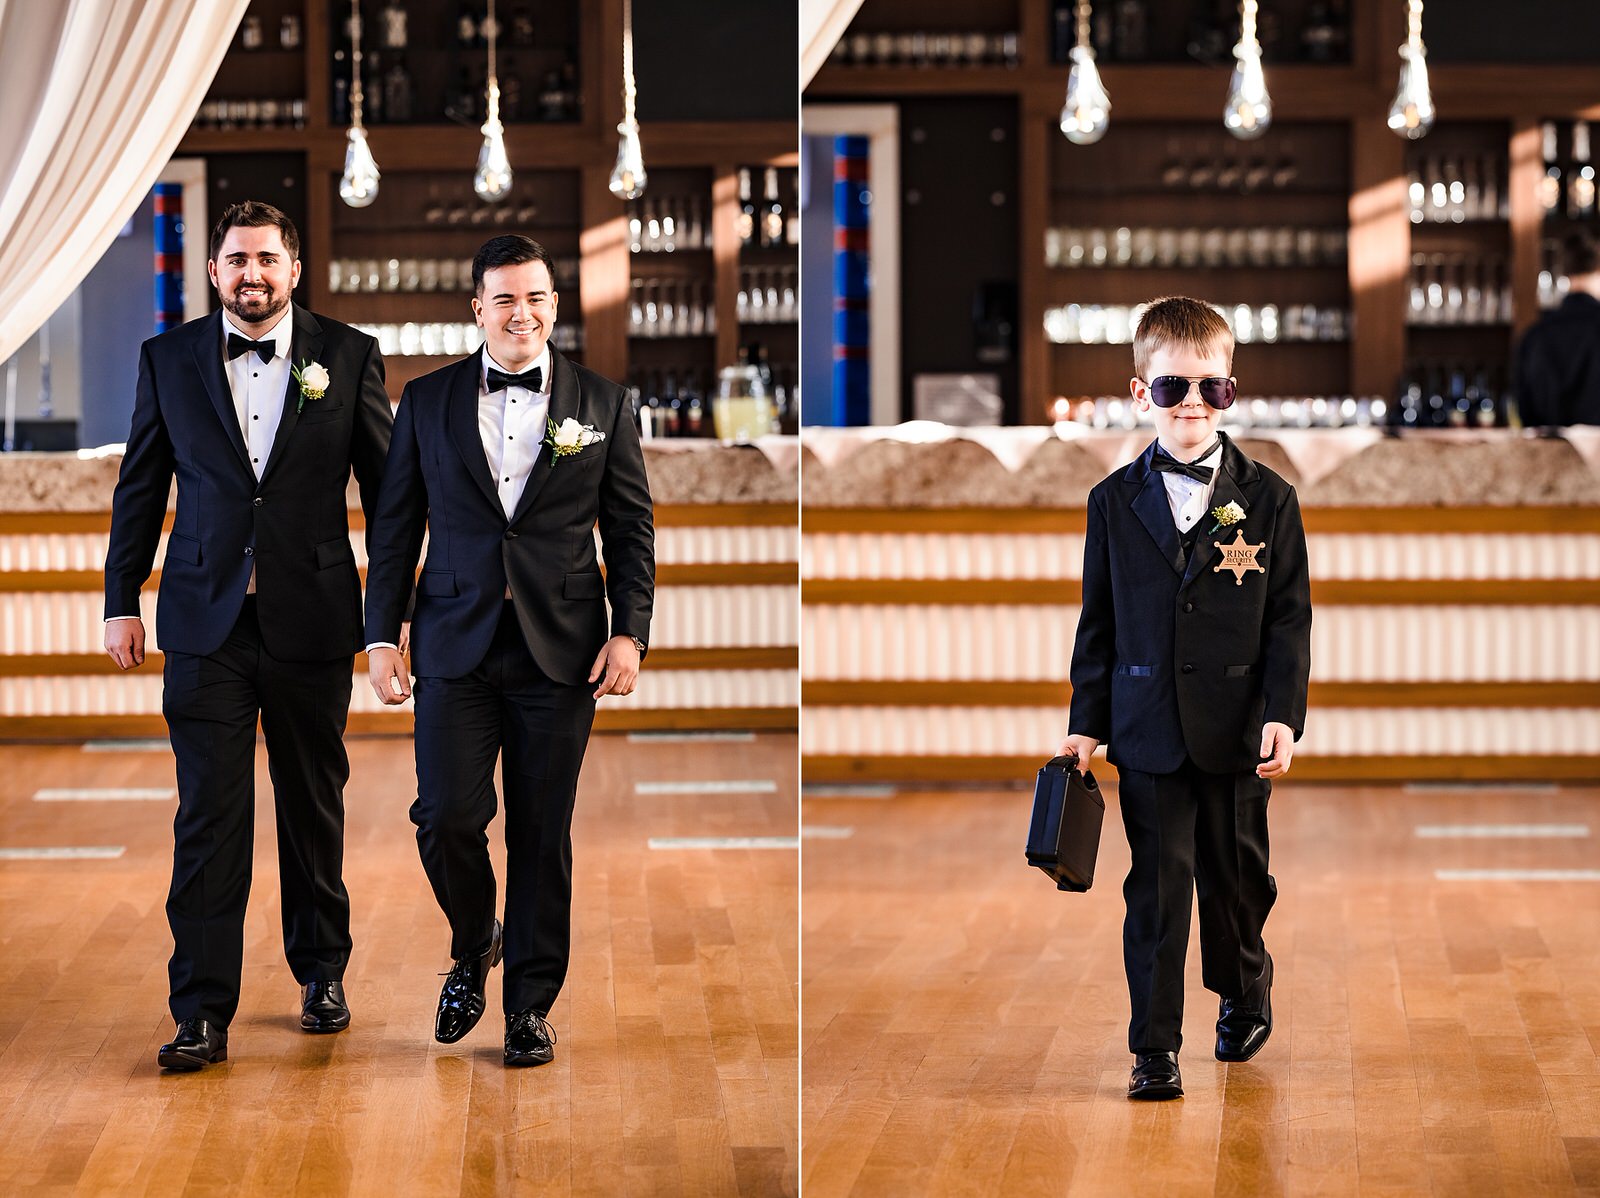 Dress your ring bearer up like he's security!!!